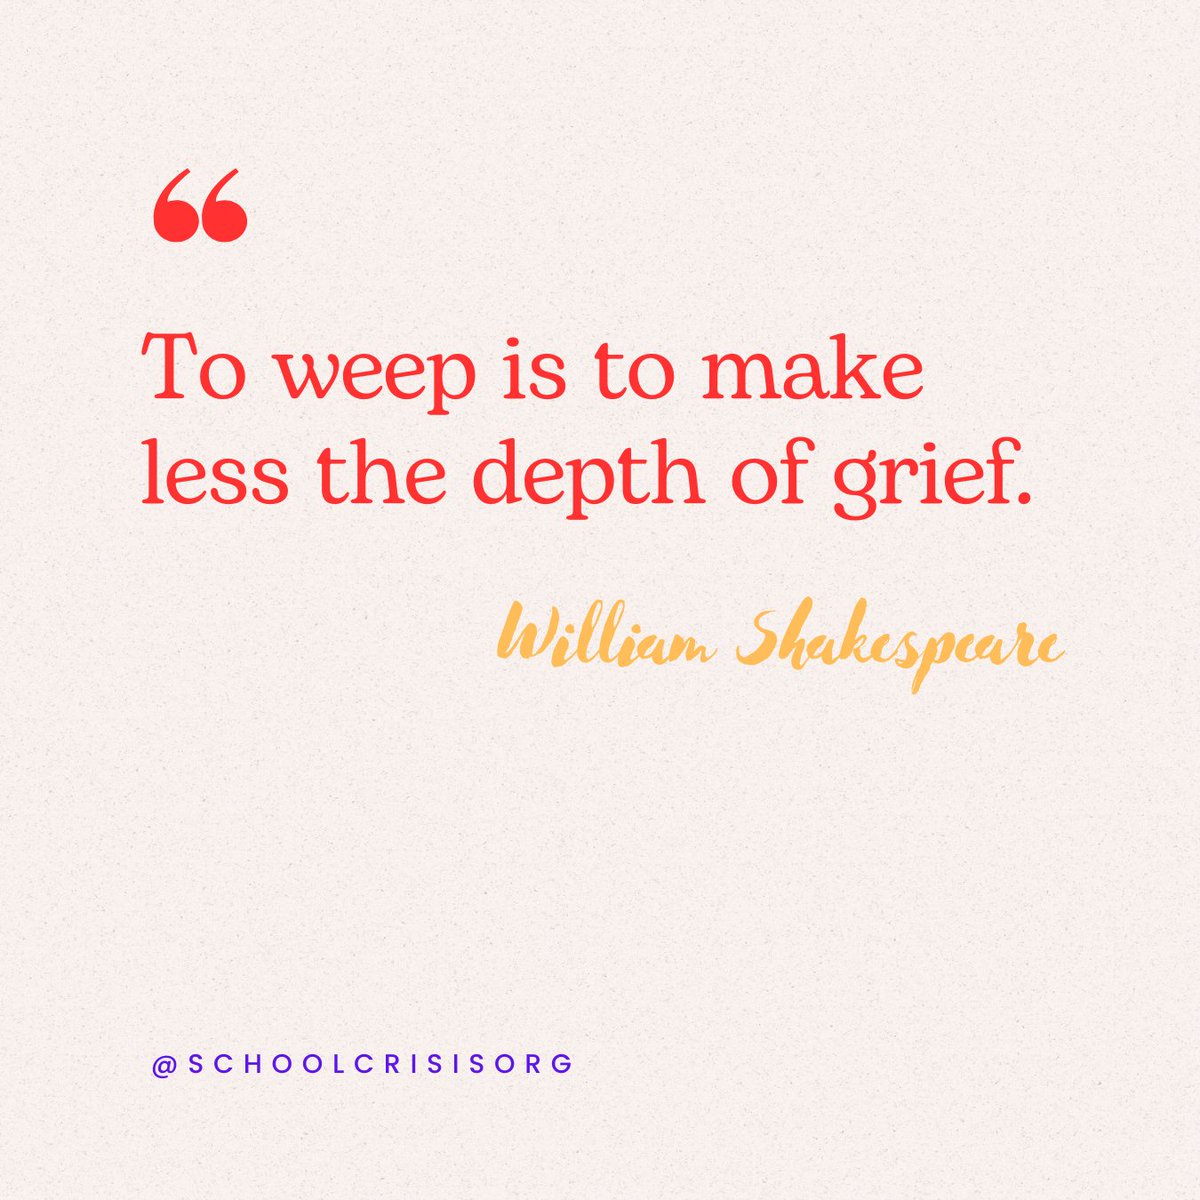 Tears may fall, but they also heal. Is your school prepared to support students through crisis and loss? Don't wait until it's too late. Check out essential resources, schoolcrisiscenter.org. #SchoolCrisis #SupportingStudents #GriefSupport #EmotionalWellbeing #YouAreNotAlone